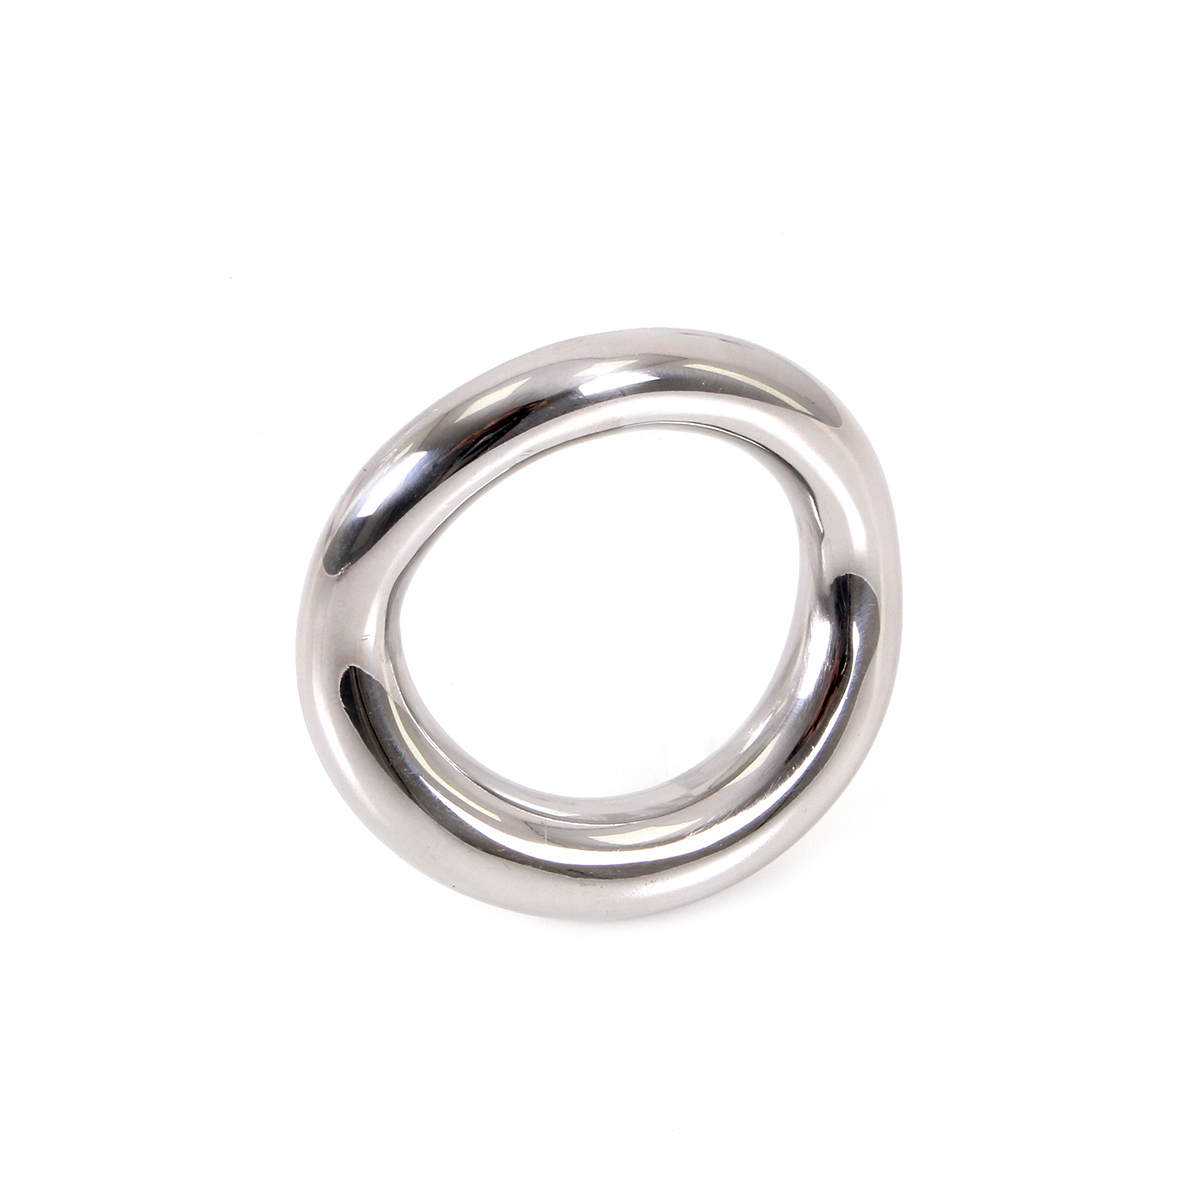 Costum-Fit-Cockring-50-mm-OPR-277046-2